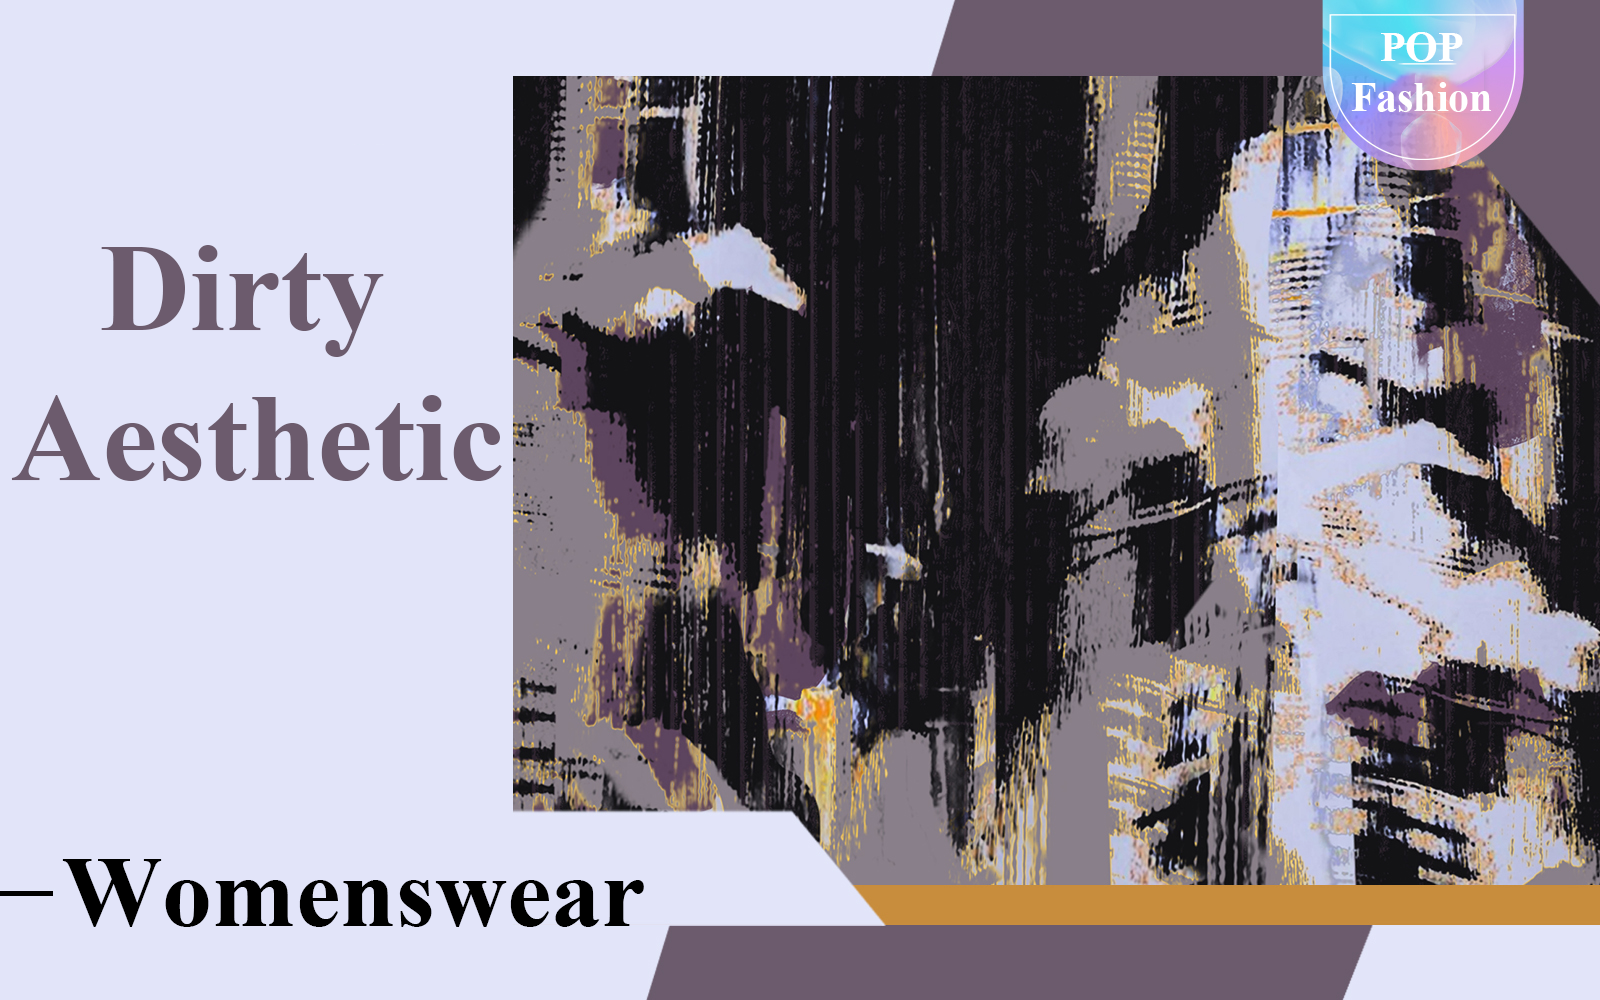 Dirty Aesthetic -- The Pattern Trend for Womenswear